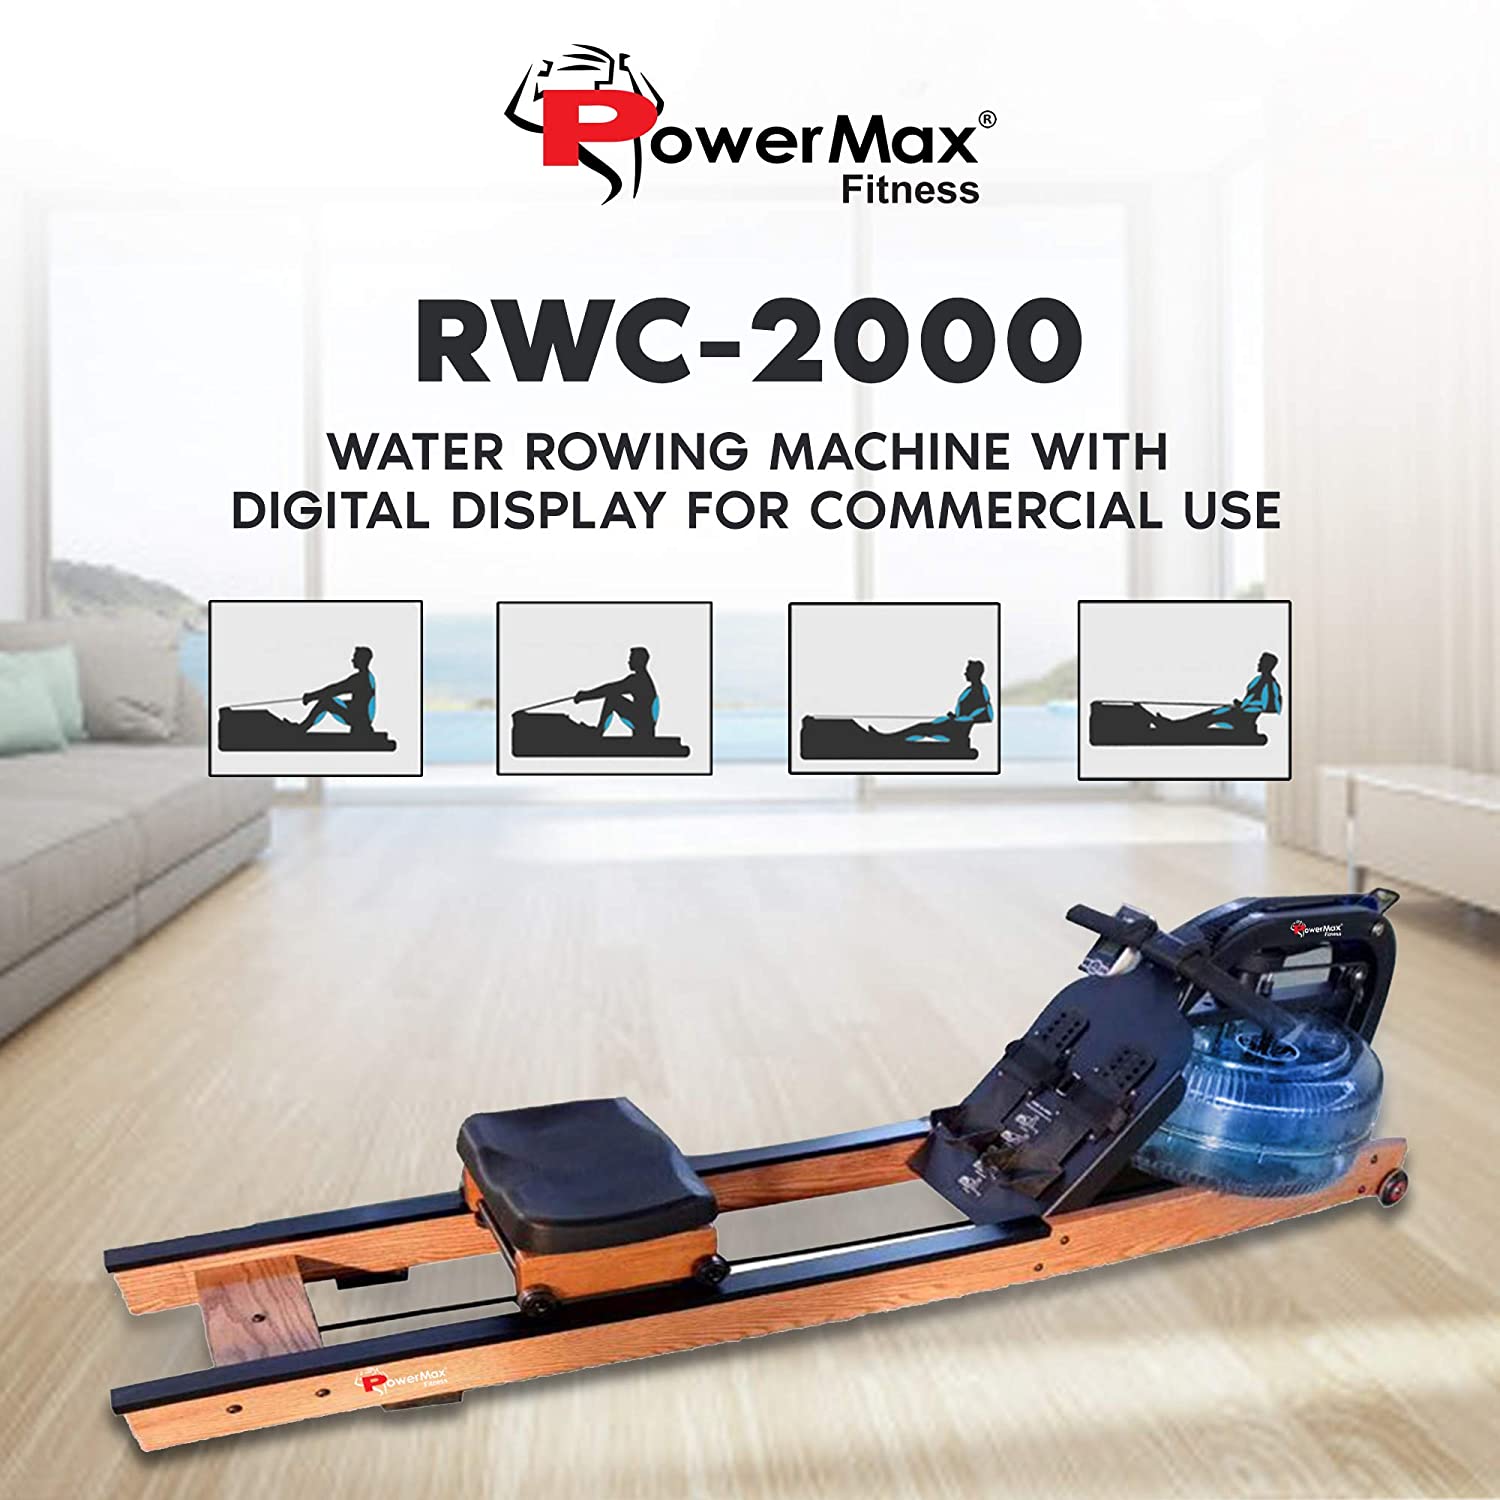 RWC-2000 Water Rowing Machine with Digital Display for Commercial use